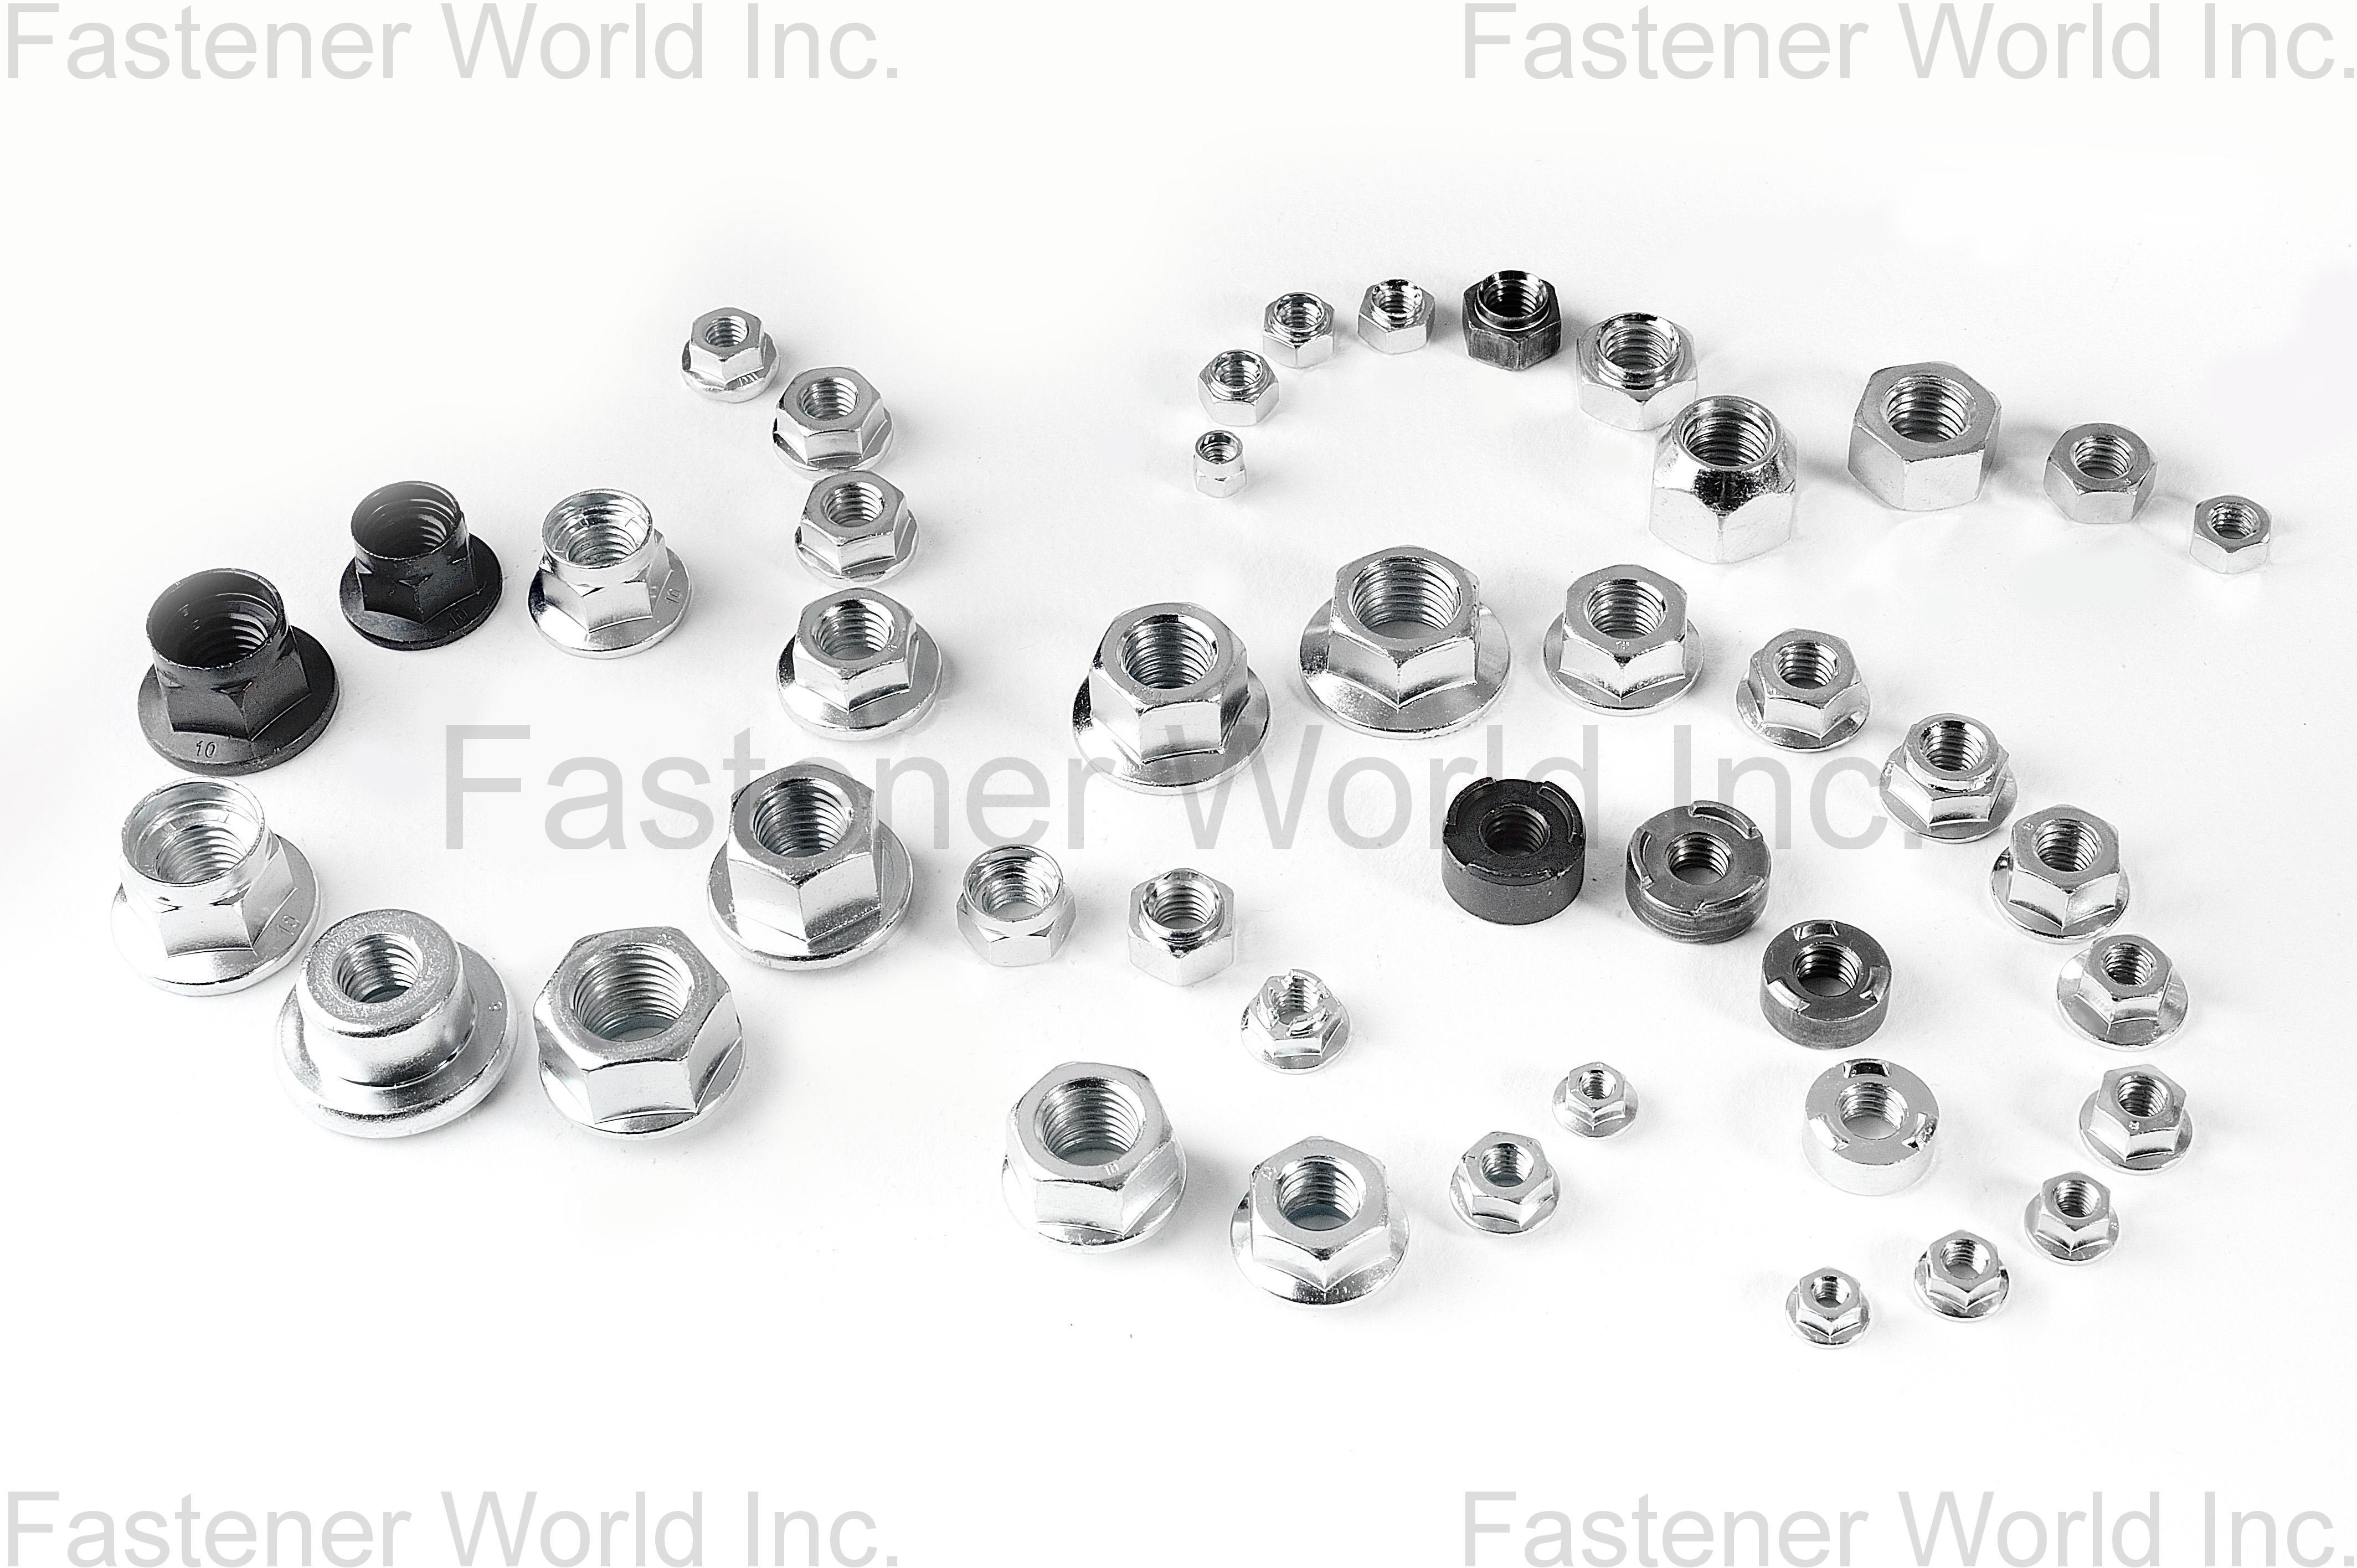 COPA FLANGE FASTENERS CORP. , Hex Flange Nuts, Combi Nuts, Nylon Nuts, Weld Nuts, Lock Nuts, Hex Flange Nylon Nuts, Round Nuts, Hex Flange Combi Nuts, Special Nuts , All Kinds Of Nuts